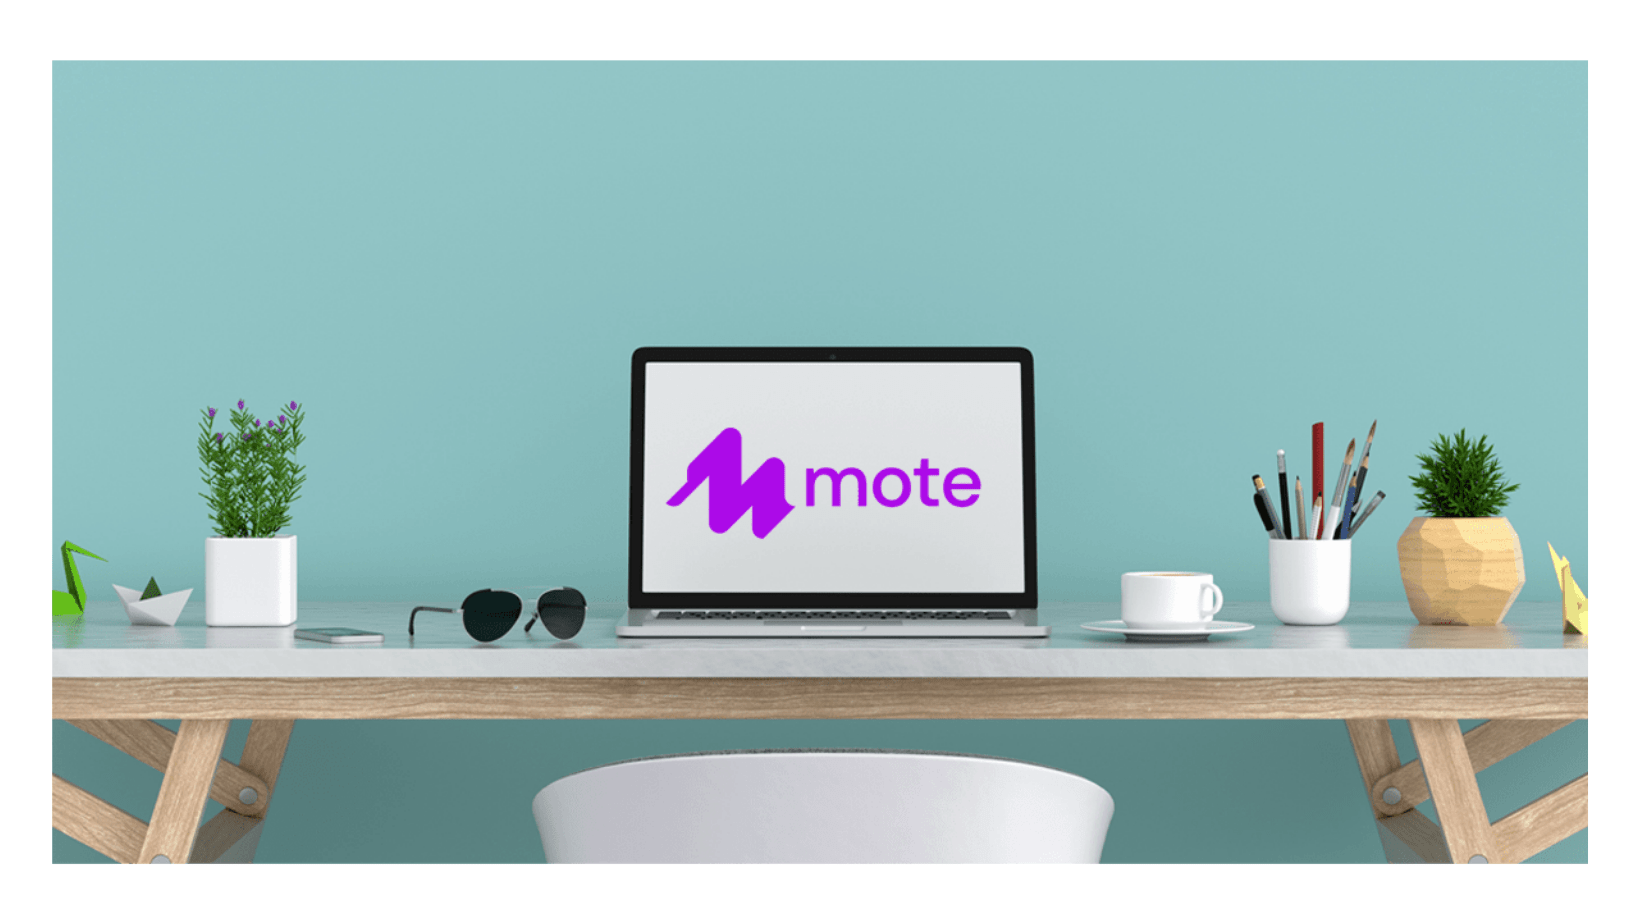 Mote Voice Messaging Tool